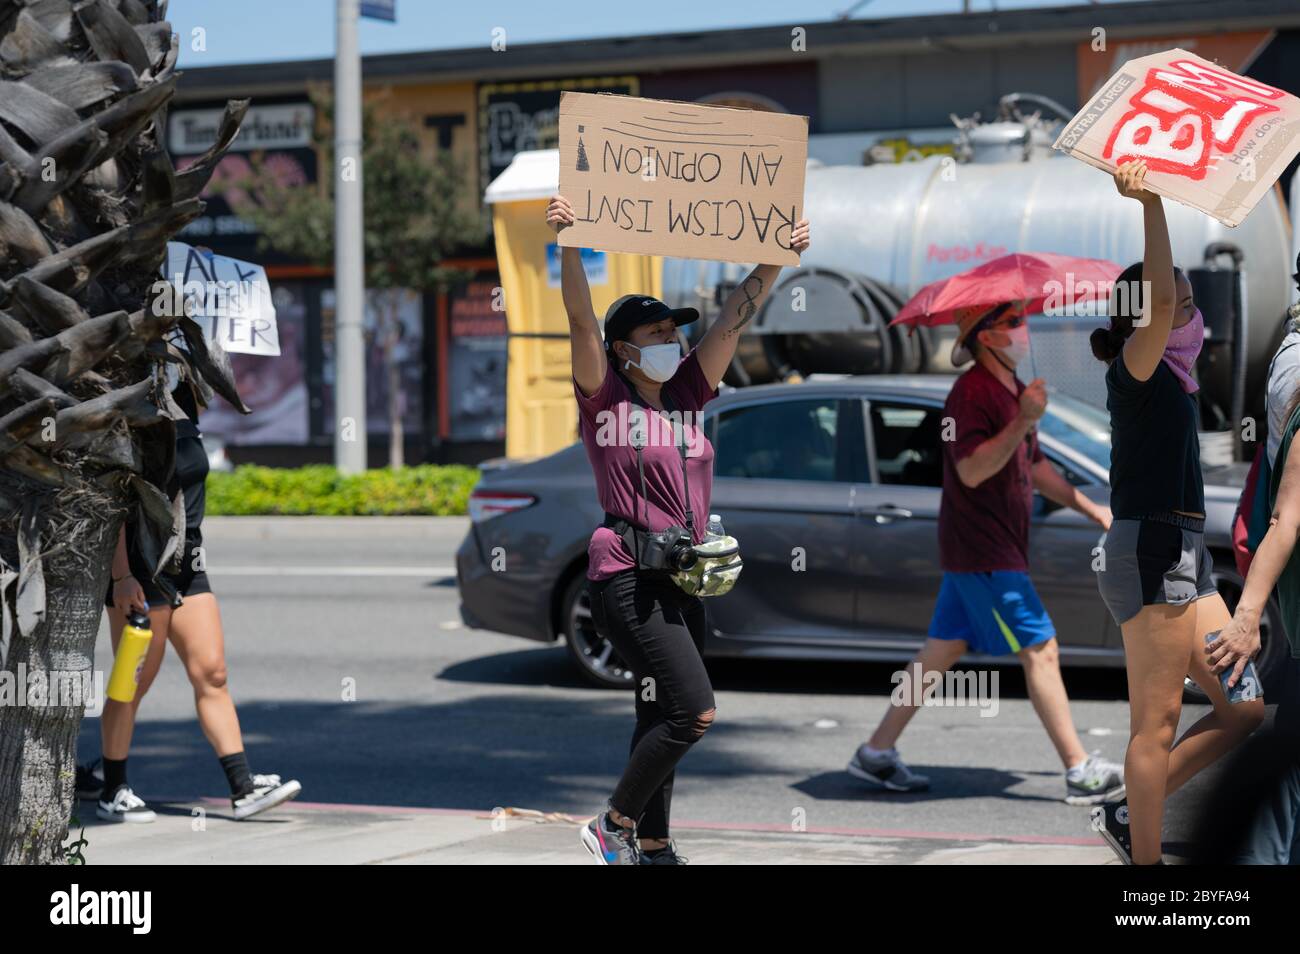 06/09/2020 Norwalk, California. Large crowds gathered at the Norwalk City Hall to march through the city in support of the Black Lives Matter movement Stock Photo